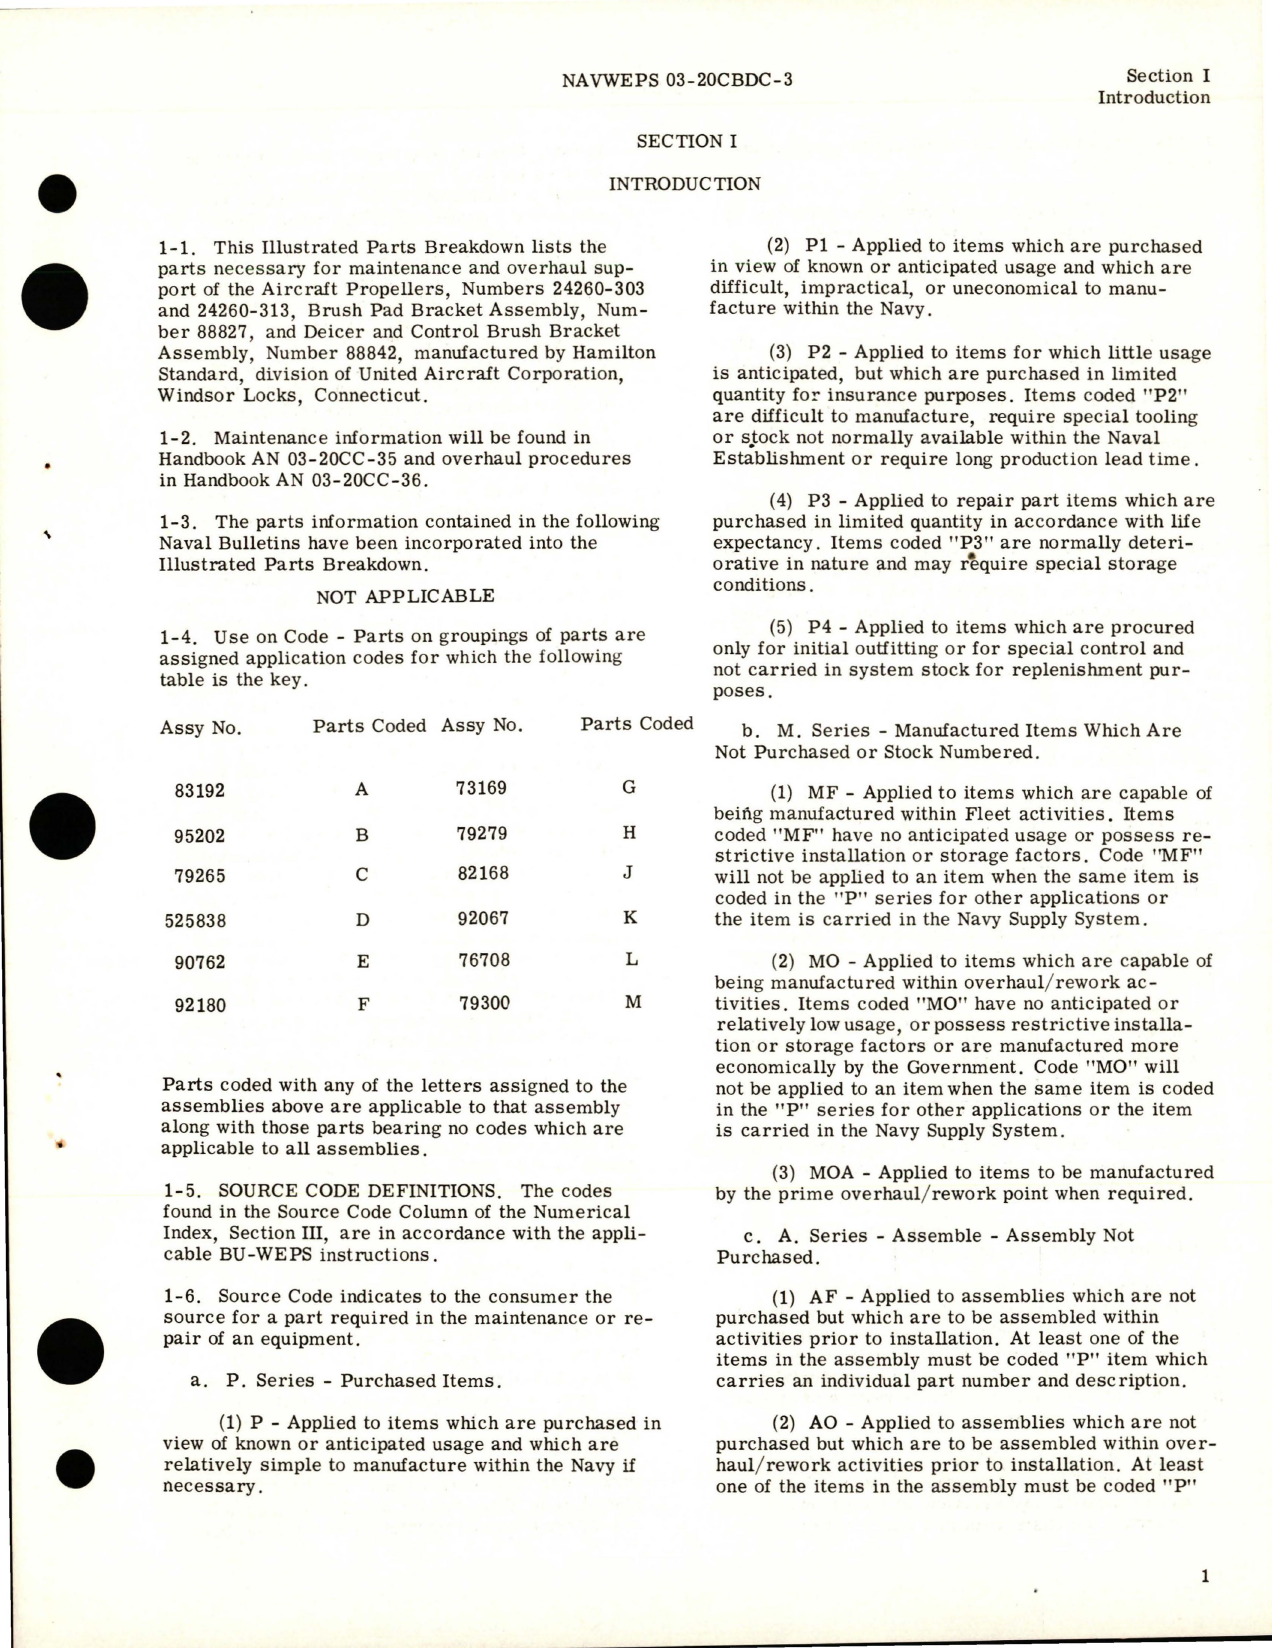 Sample page 5 from AirCorps Library document: Illustrated Parts Breakdown for Variable Pitch Propeller and Brush Pad Bracket Assembly